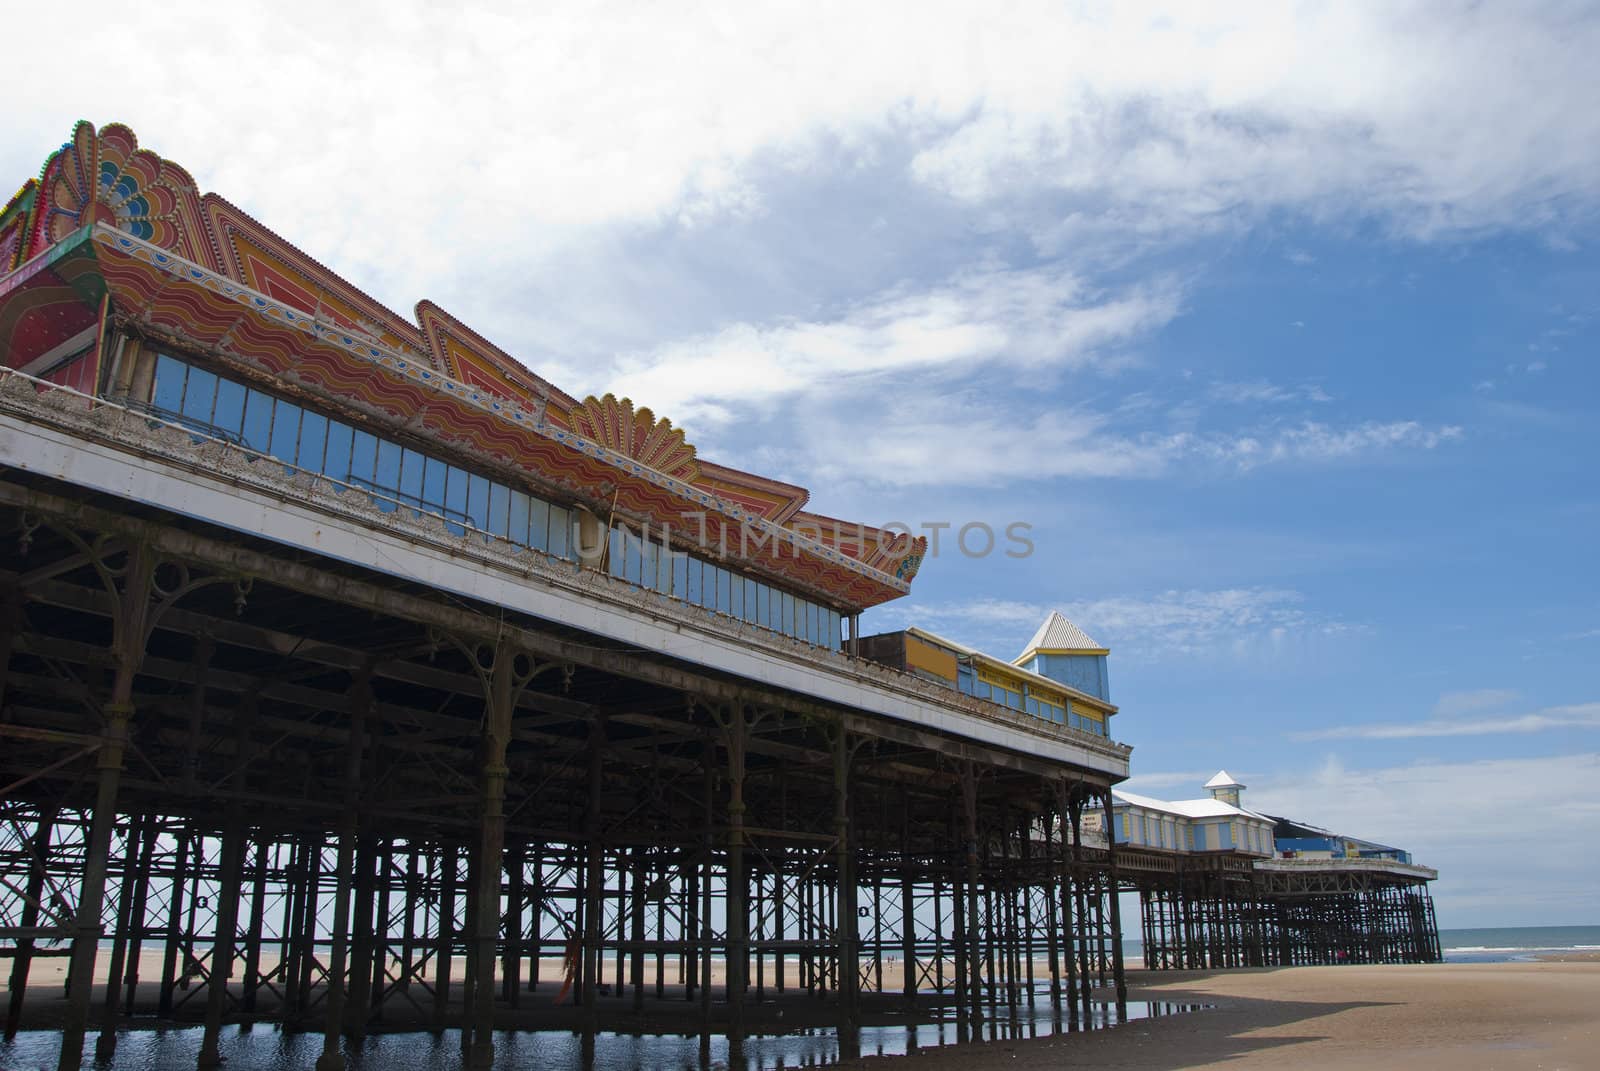 Central Pier Blackpool from beach by d40xboy